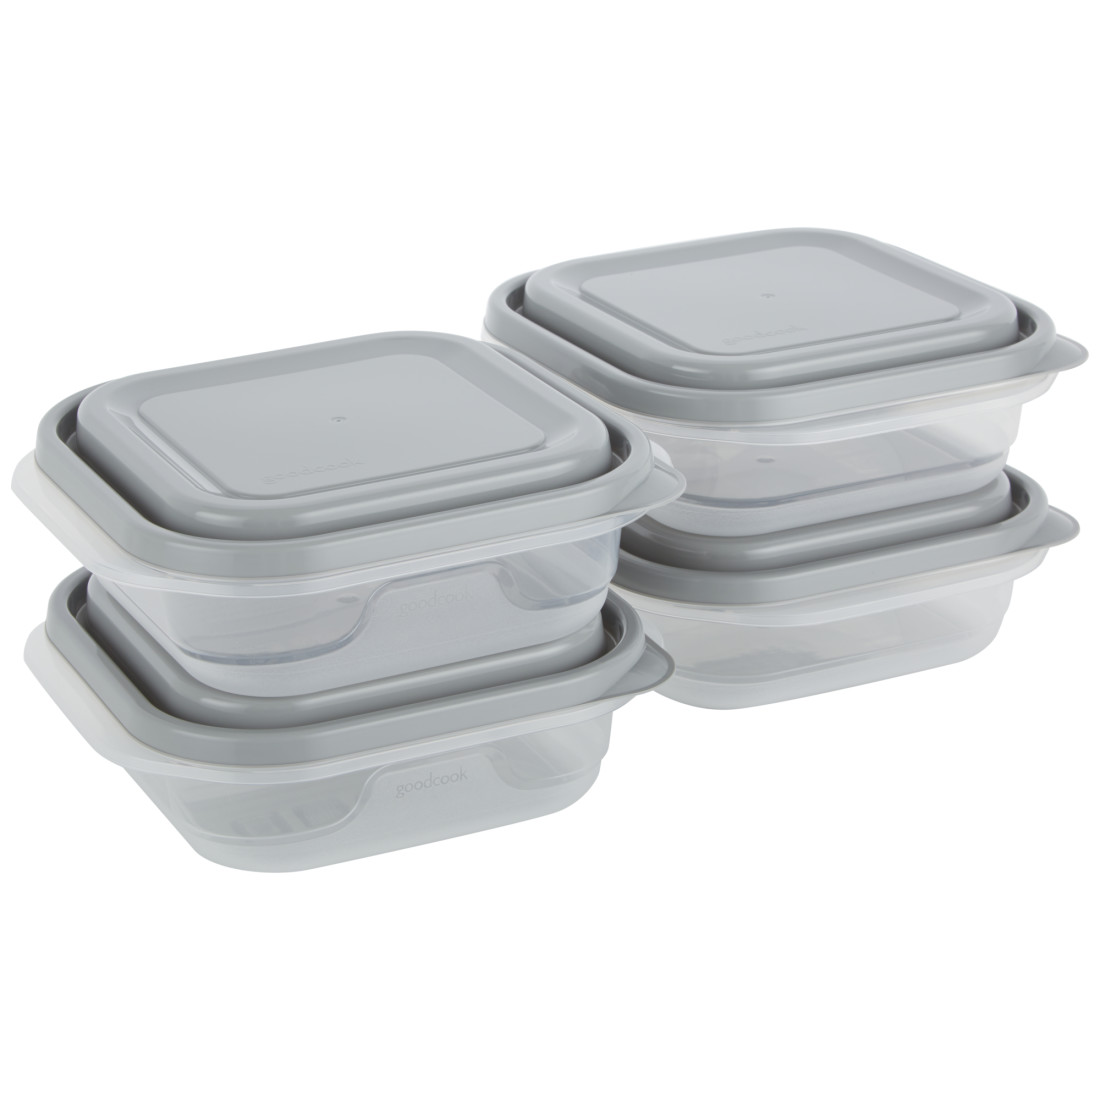 Best food storage containers for leftovers, lunch and snacks